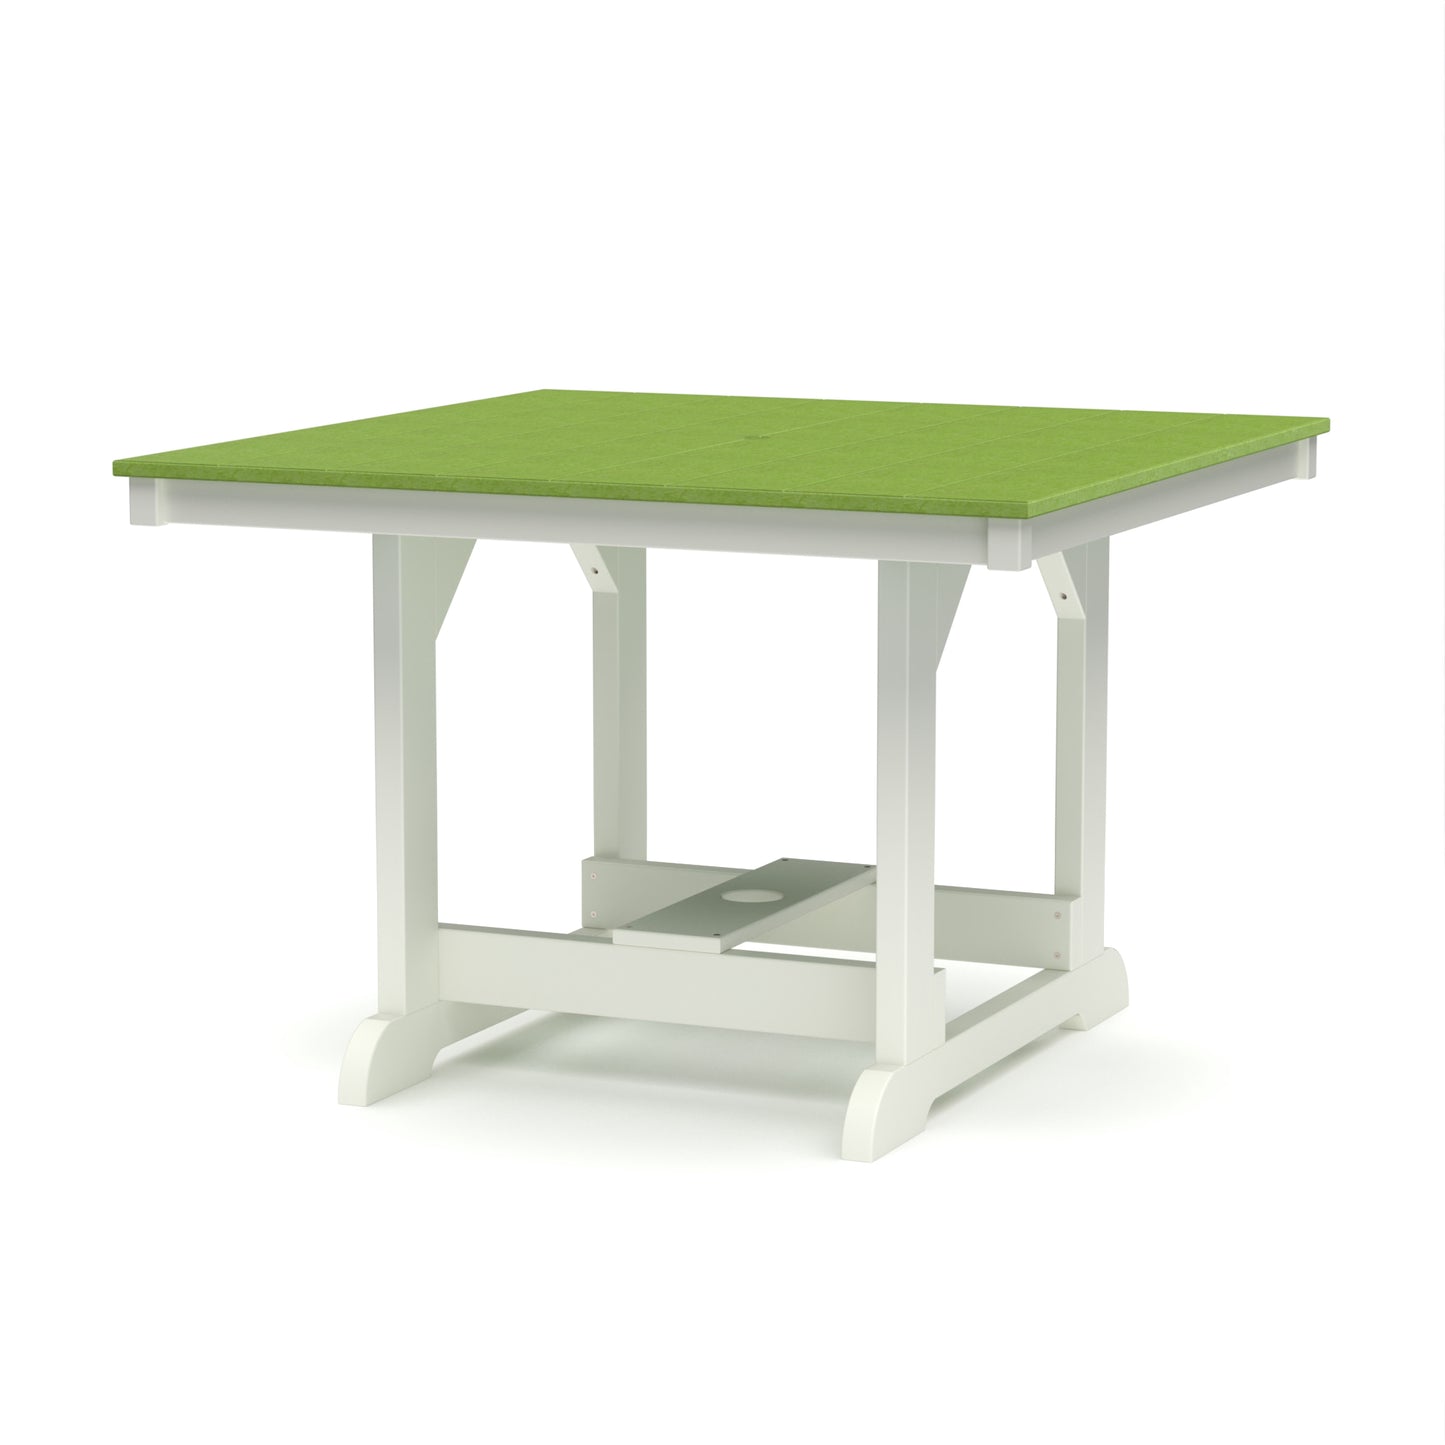 Wildridge Heritage Recycled Plastic Outdoor 44x44 Dining Table - LEAD TIME TO SHIP 4 WEEKS